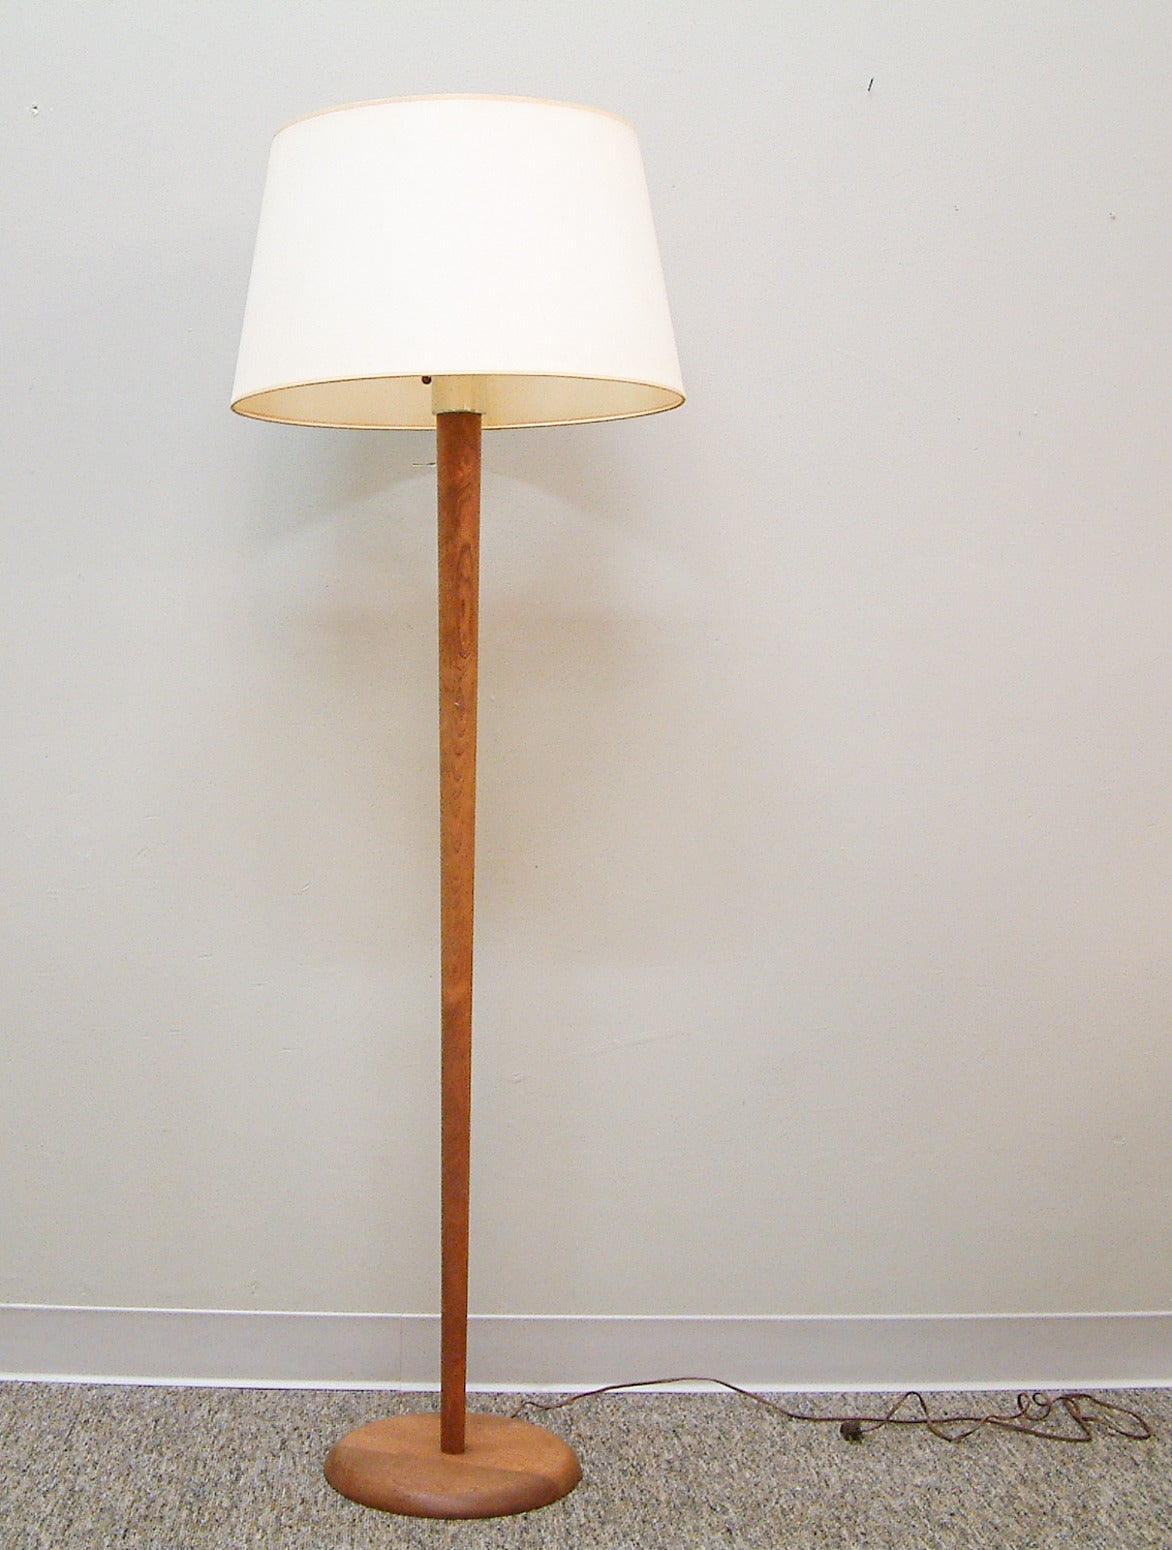 A finely executed floor lamp with a single socket, glass diffuser insert and original fabric shade.  For an almost identical model reference:  Sollo Rago - April 22-23, 2006, lot 1542.

Shade measurement:  20